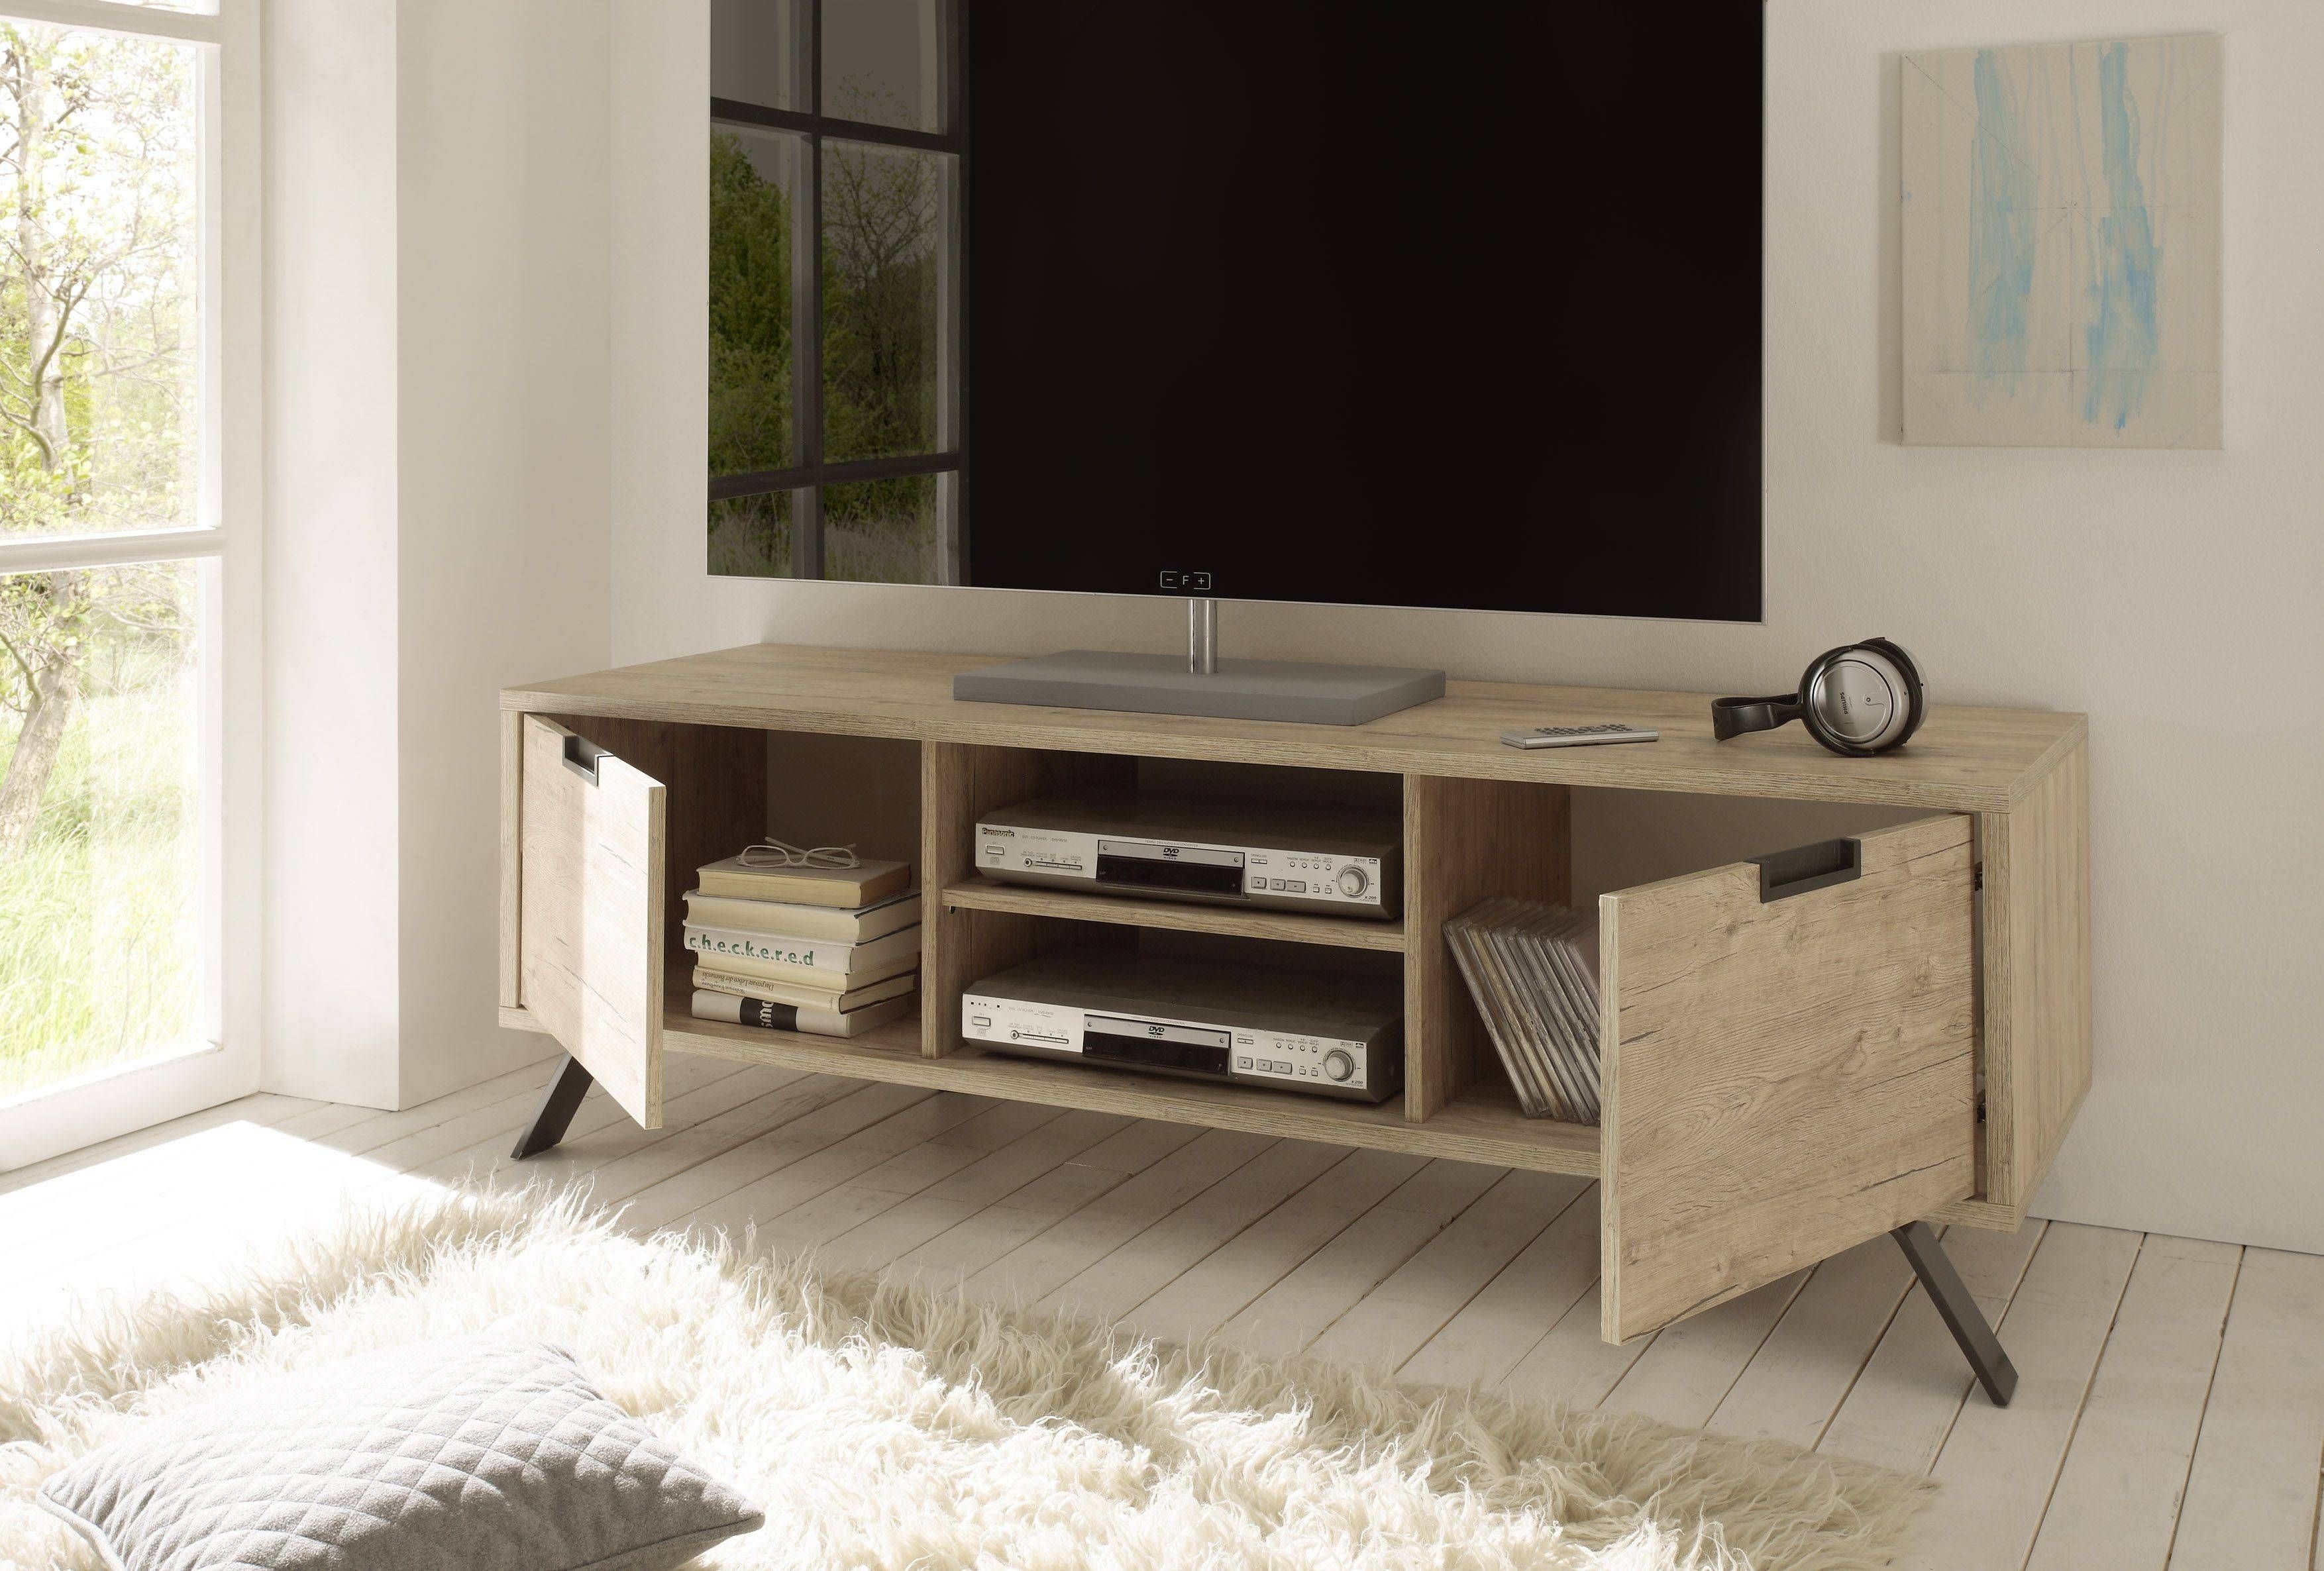 Palma Tv Stand, Sherwood Oak Buy Online At Best Price – Sohomod For Sideboard Tv Stand (View 15 of 20)